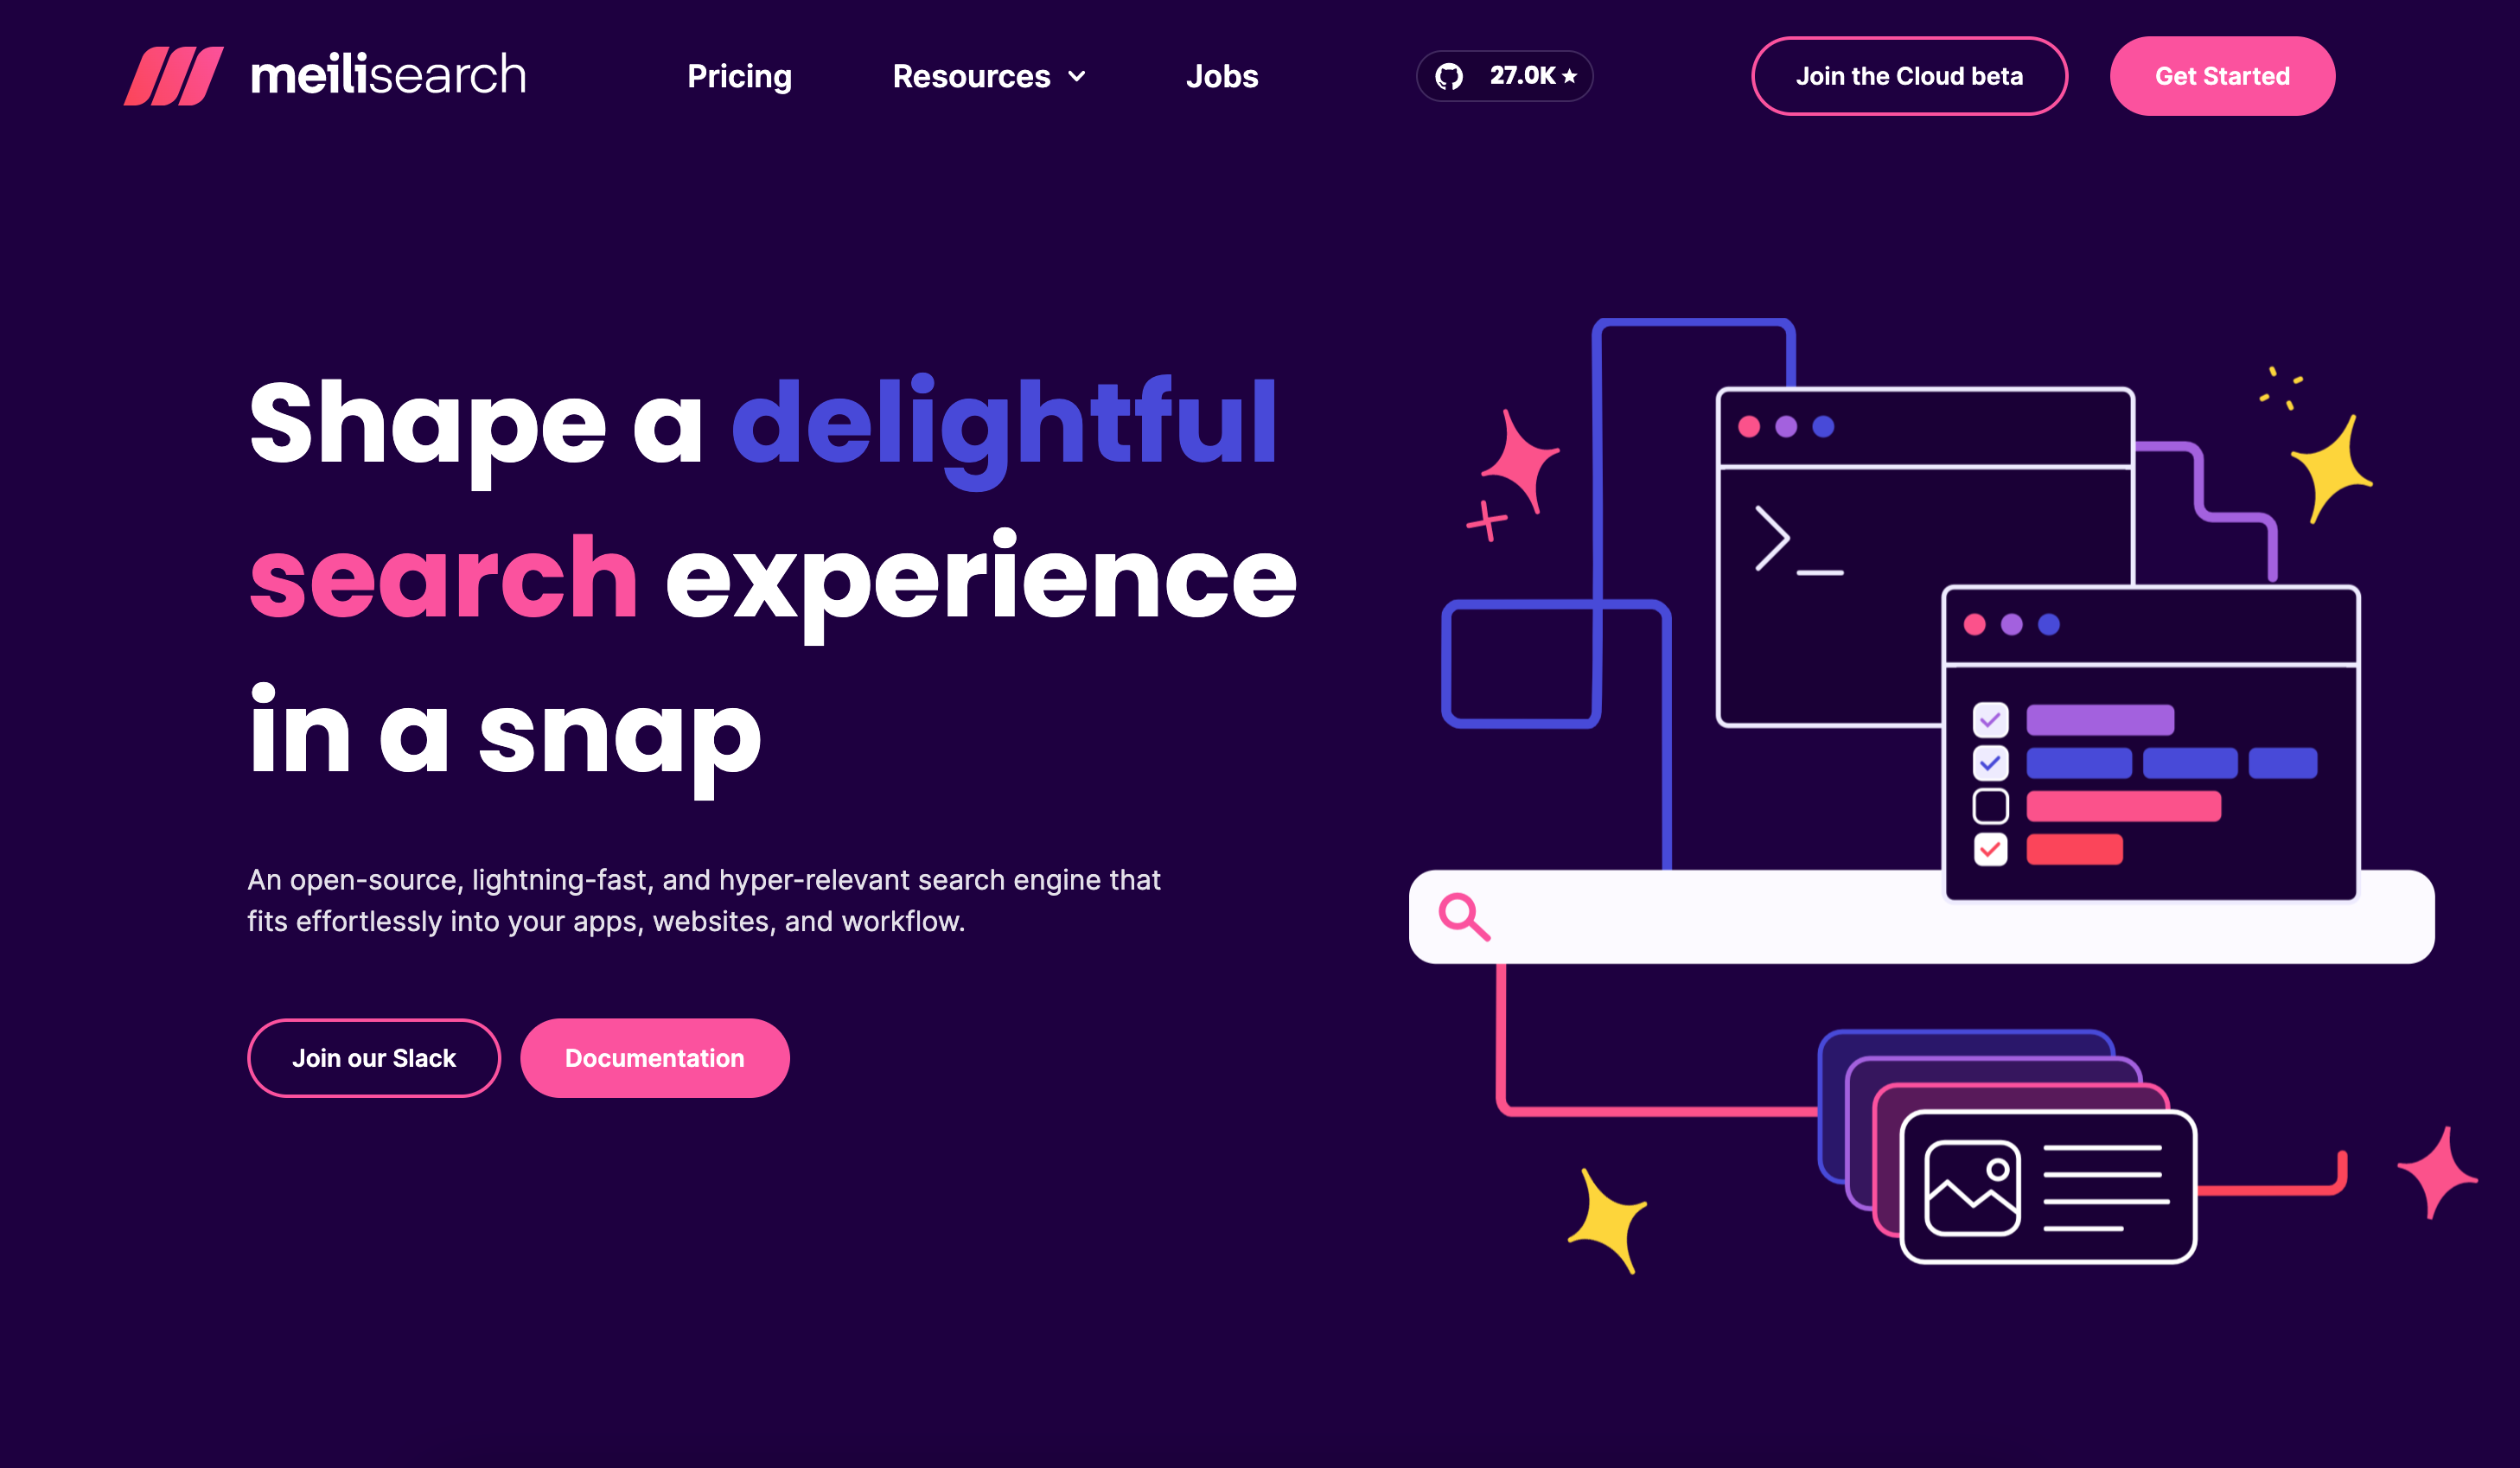 Meilisearch's landing page